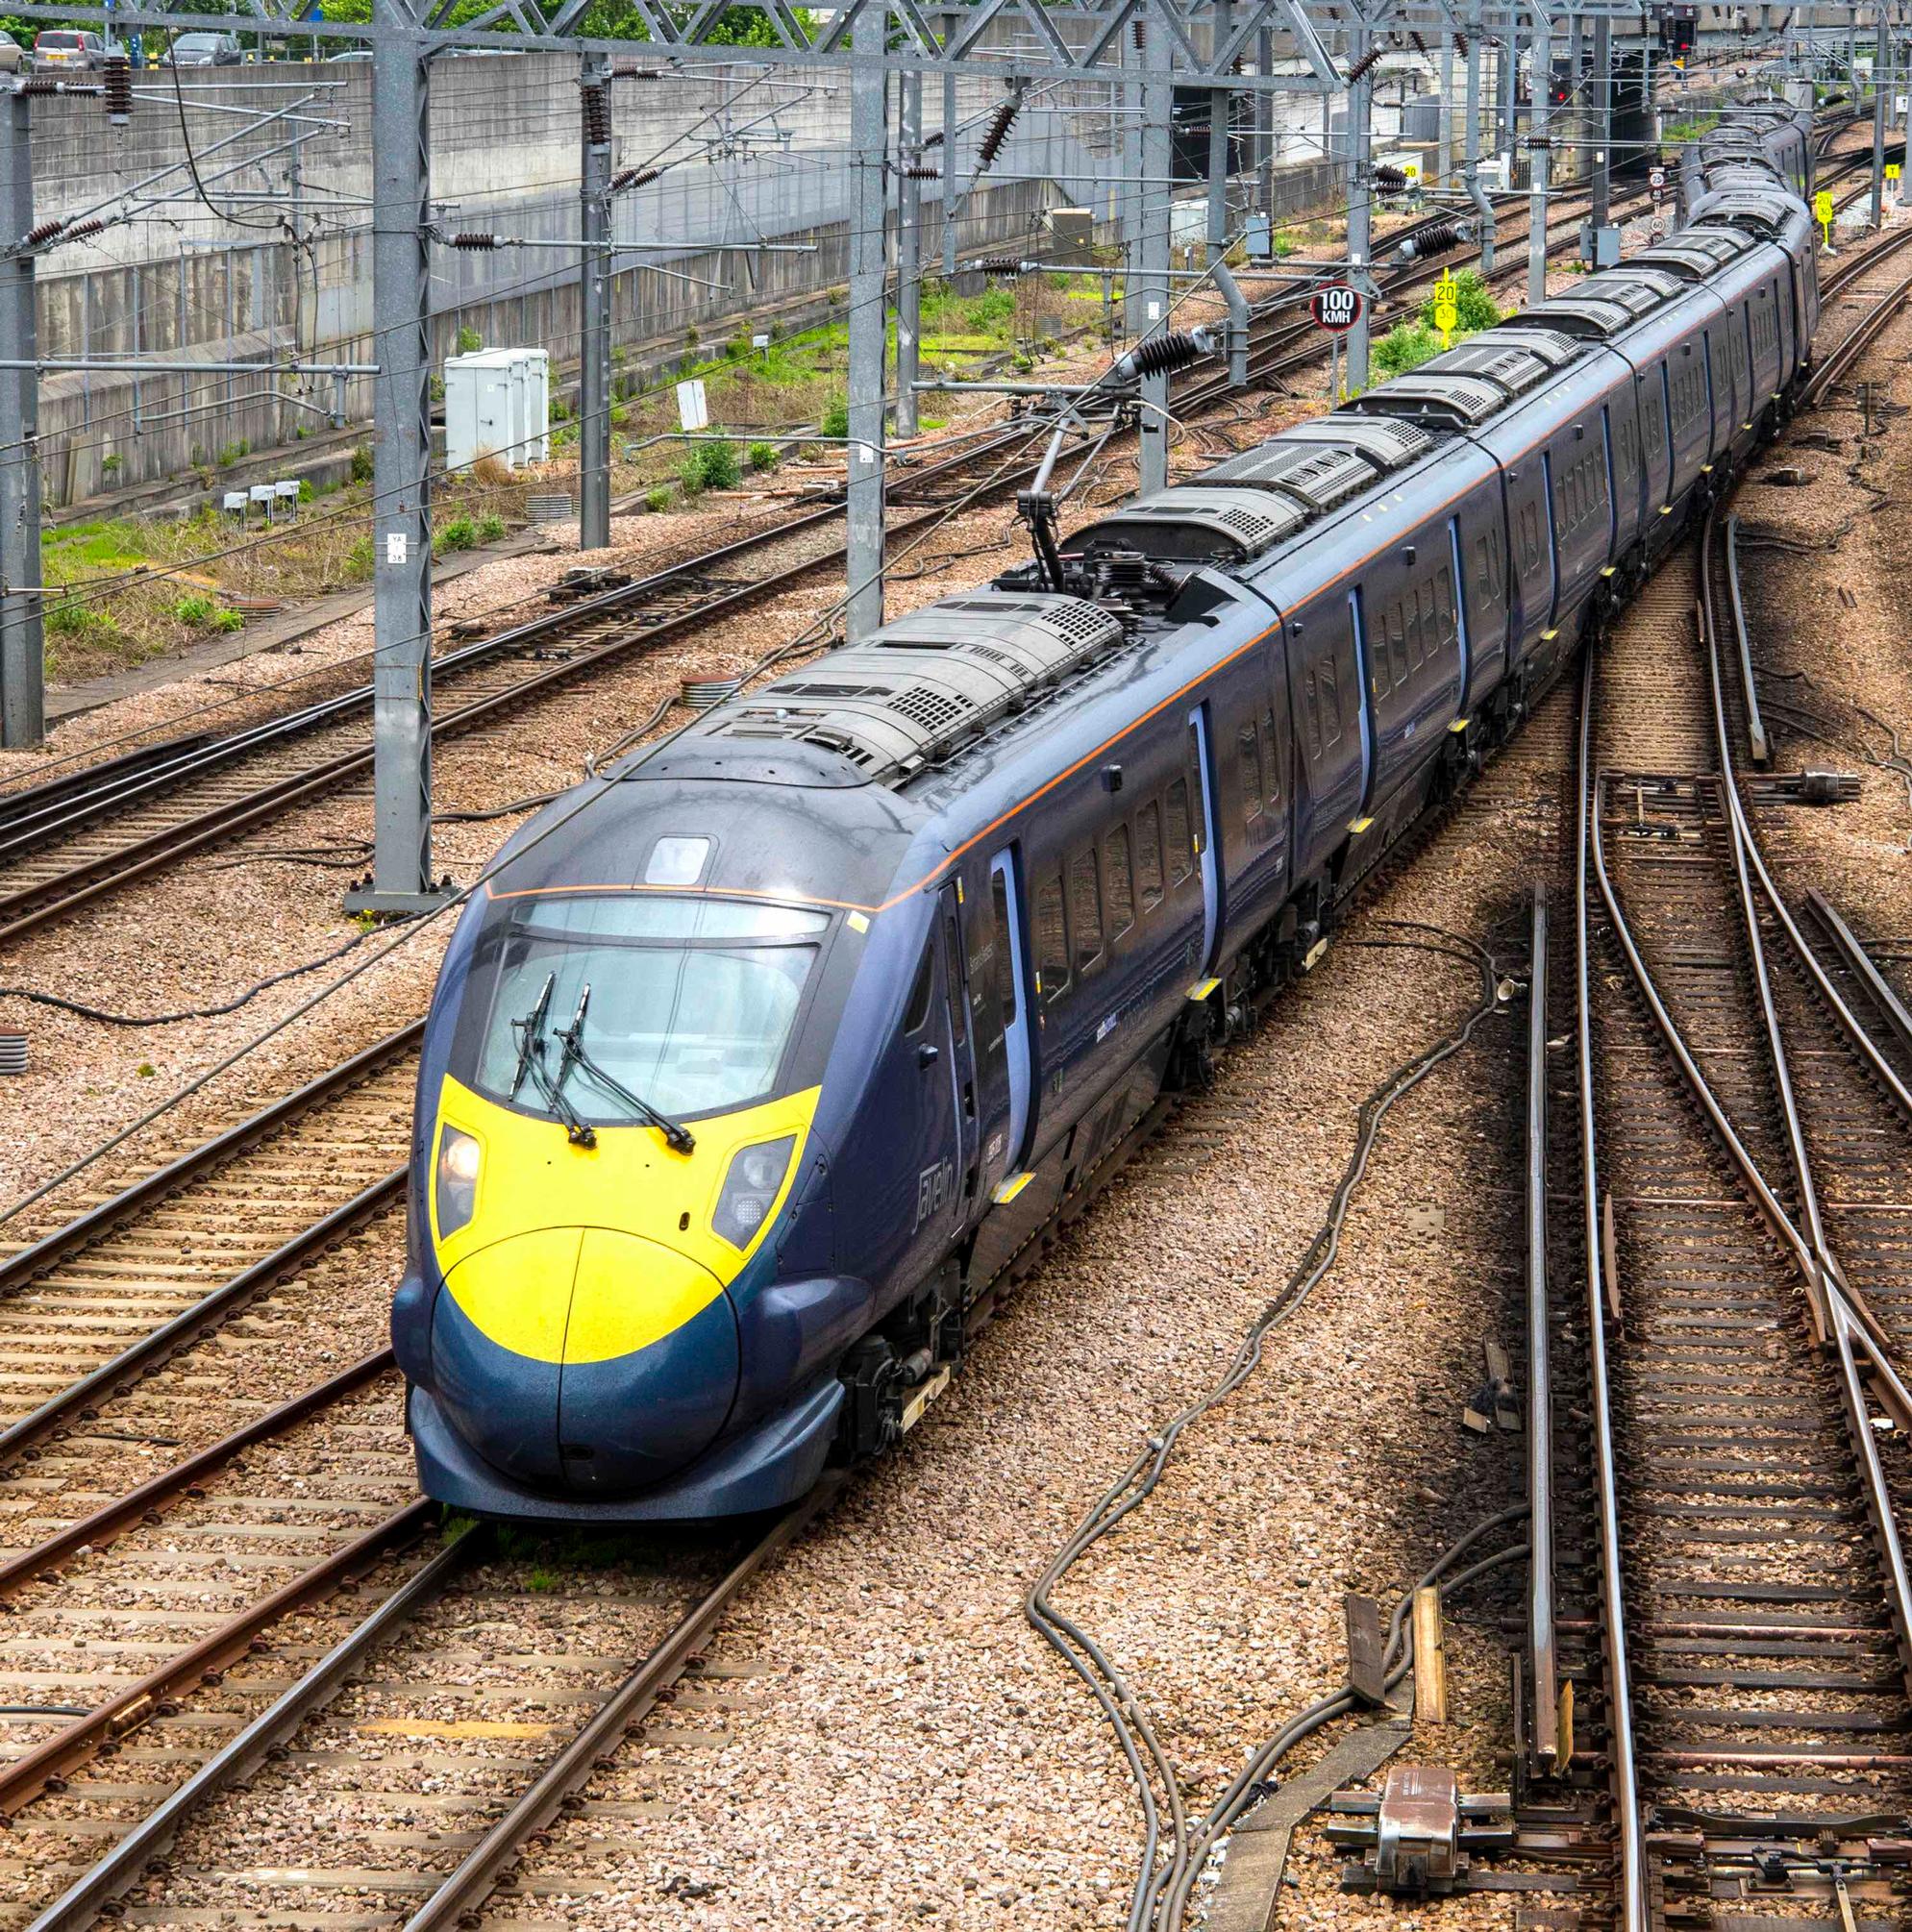 Southeastern’s Javelin trains are not making full use of the paths on HS1, but the DfT is paying for them anyway